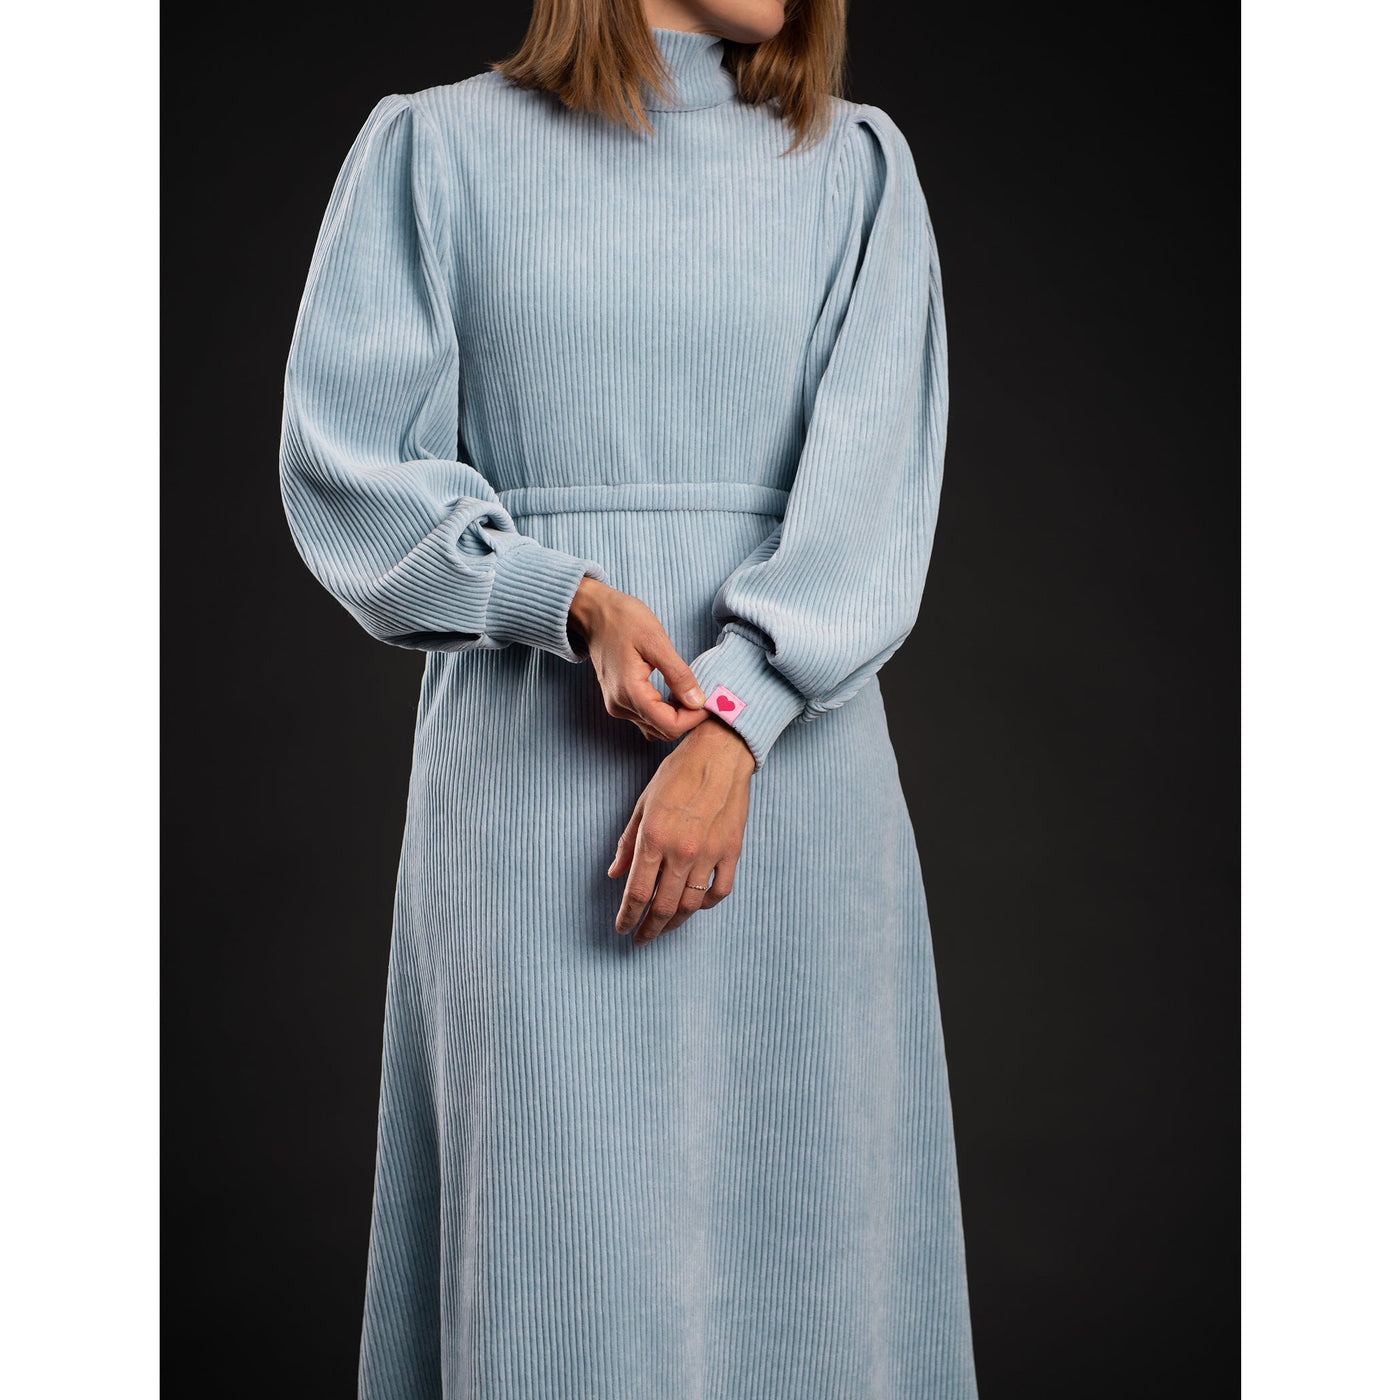 Cozy Comfort Meets Elegance: Introducing the Nora Brushed Knit Dress for Effortless Style